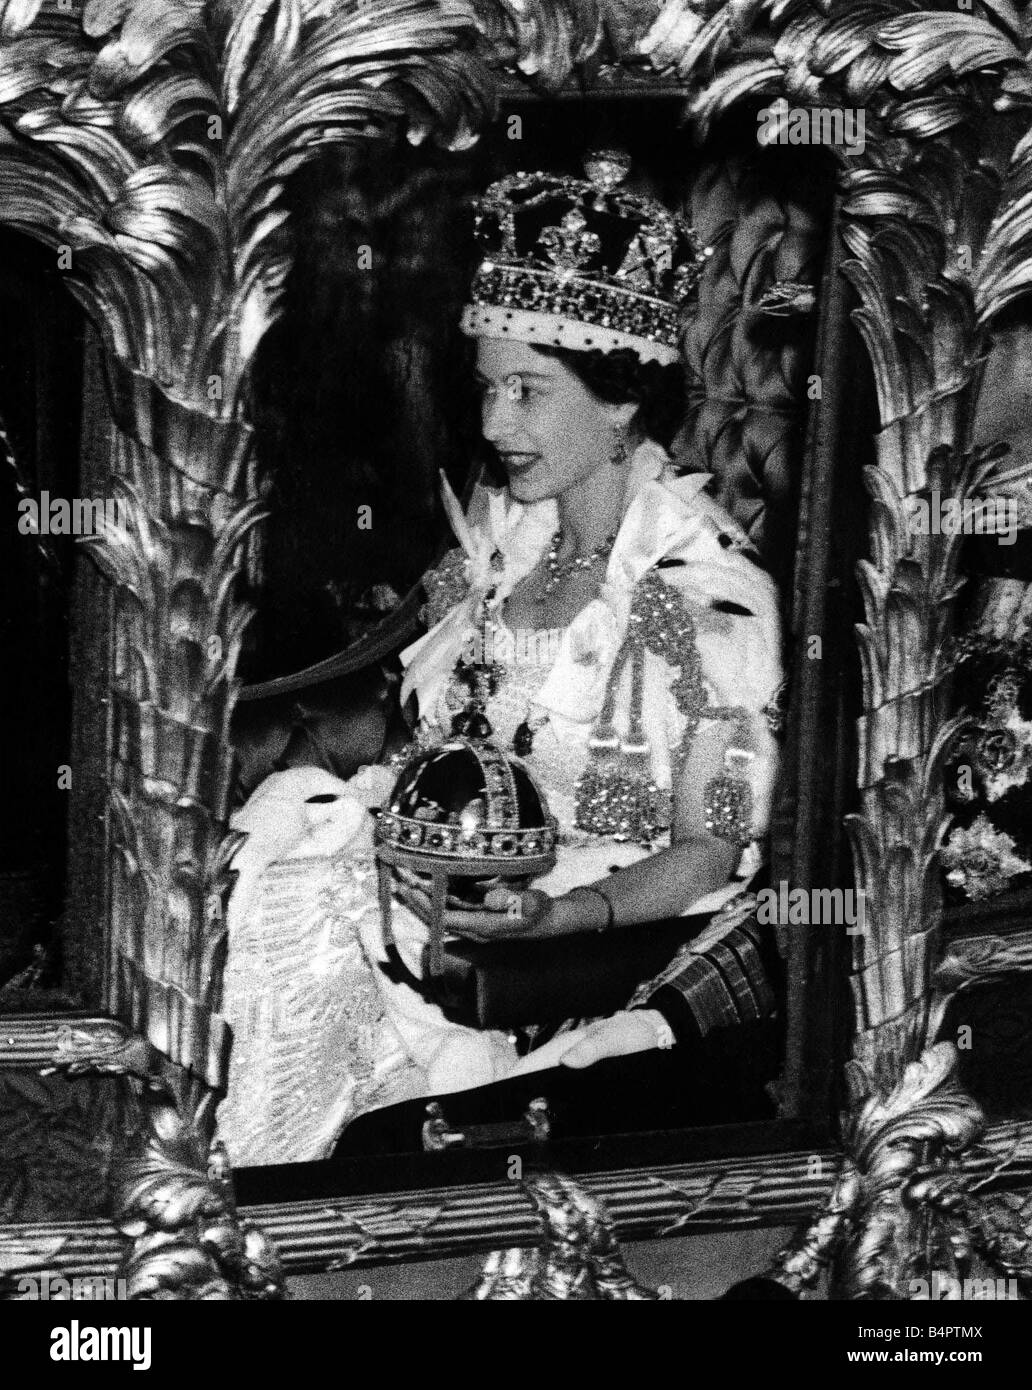 Queen Elizabeth II Coronation 1953 The Queen riding along in the coronation coach wearing crown and carrying orb Stock Photo